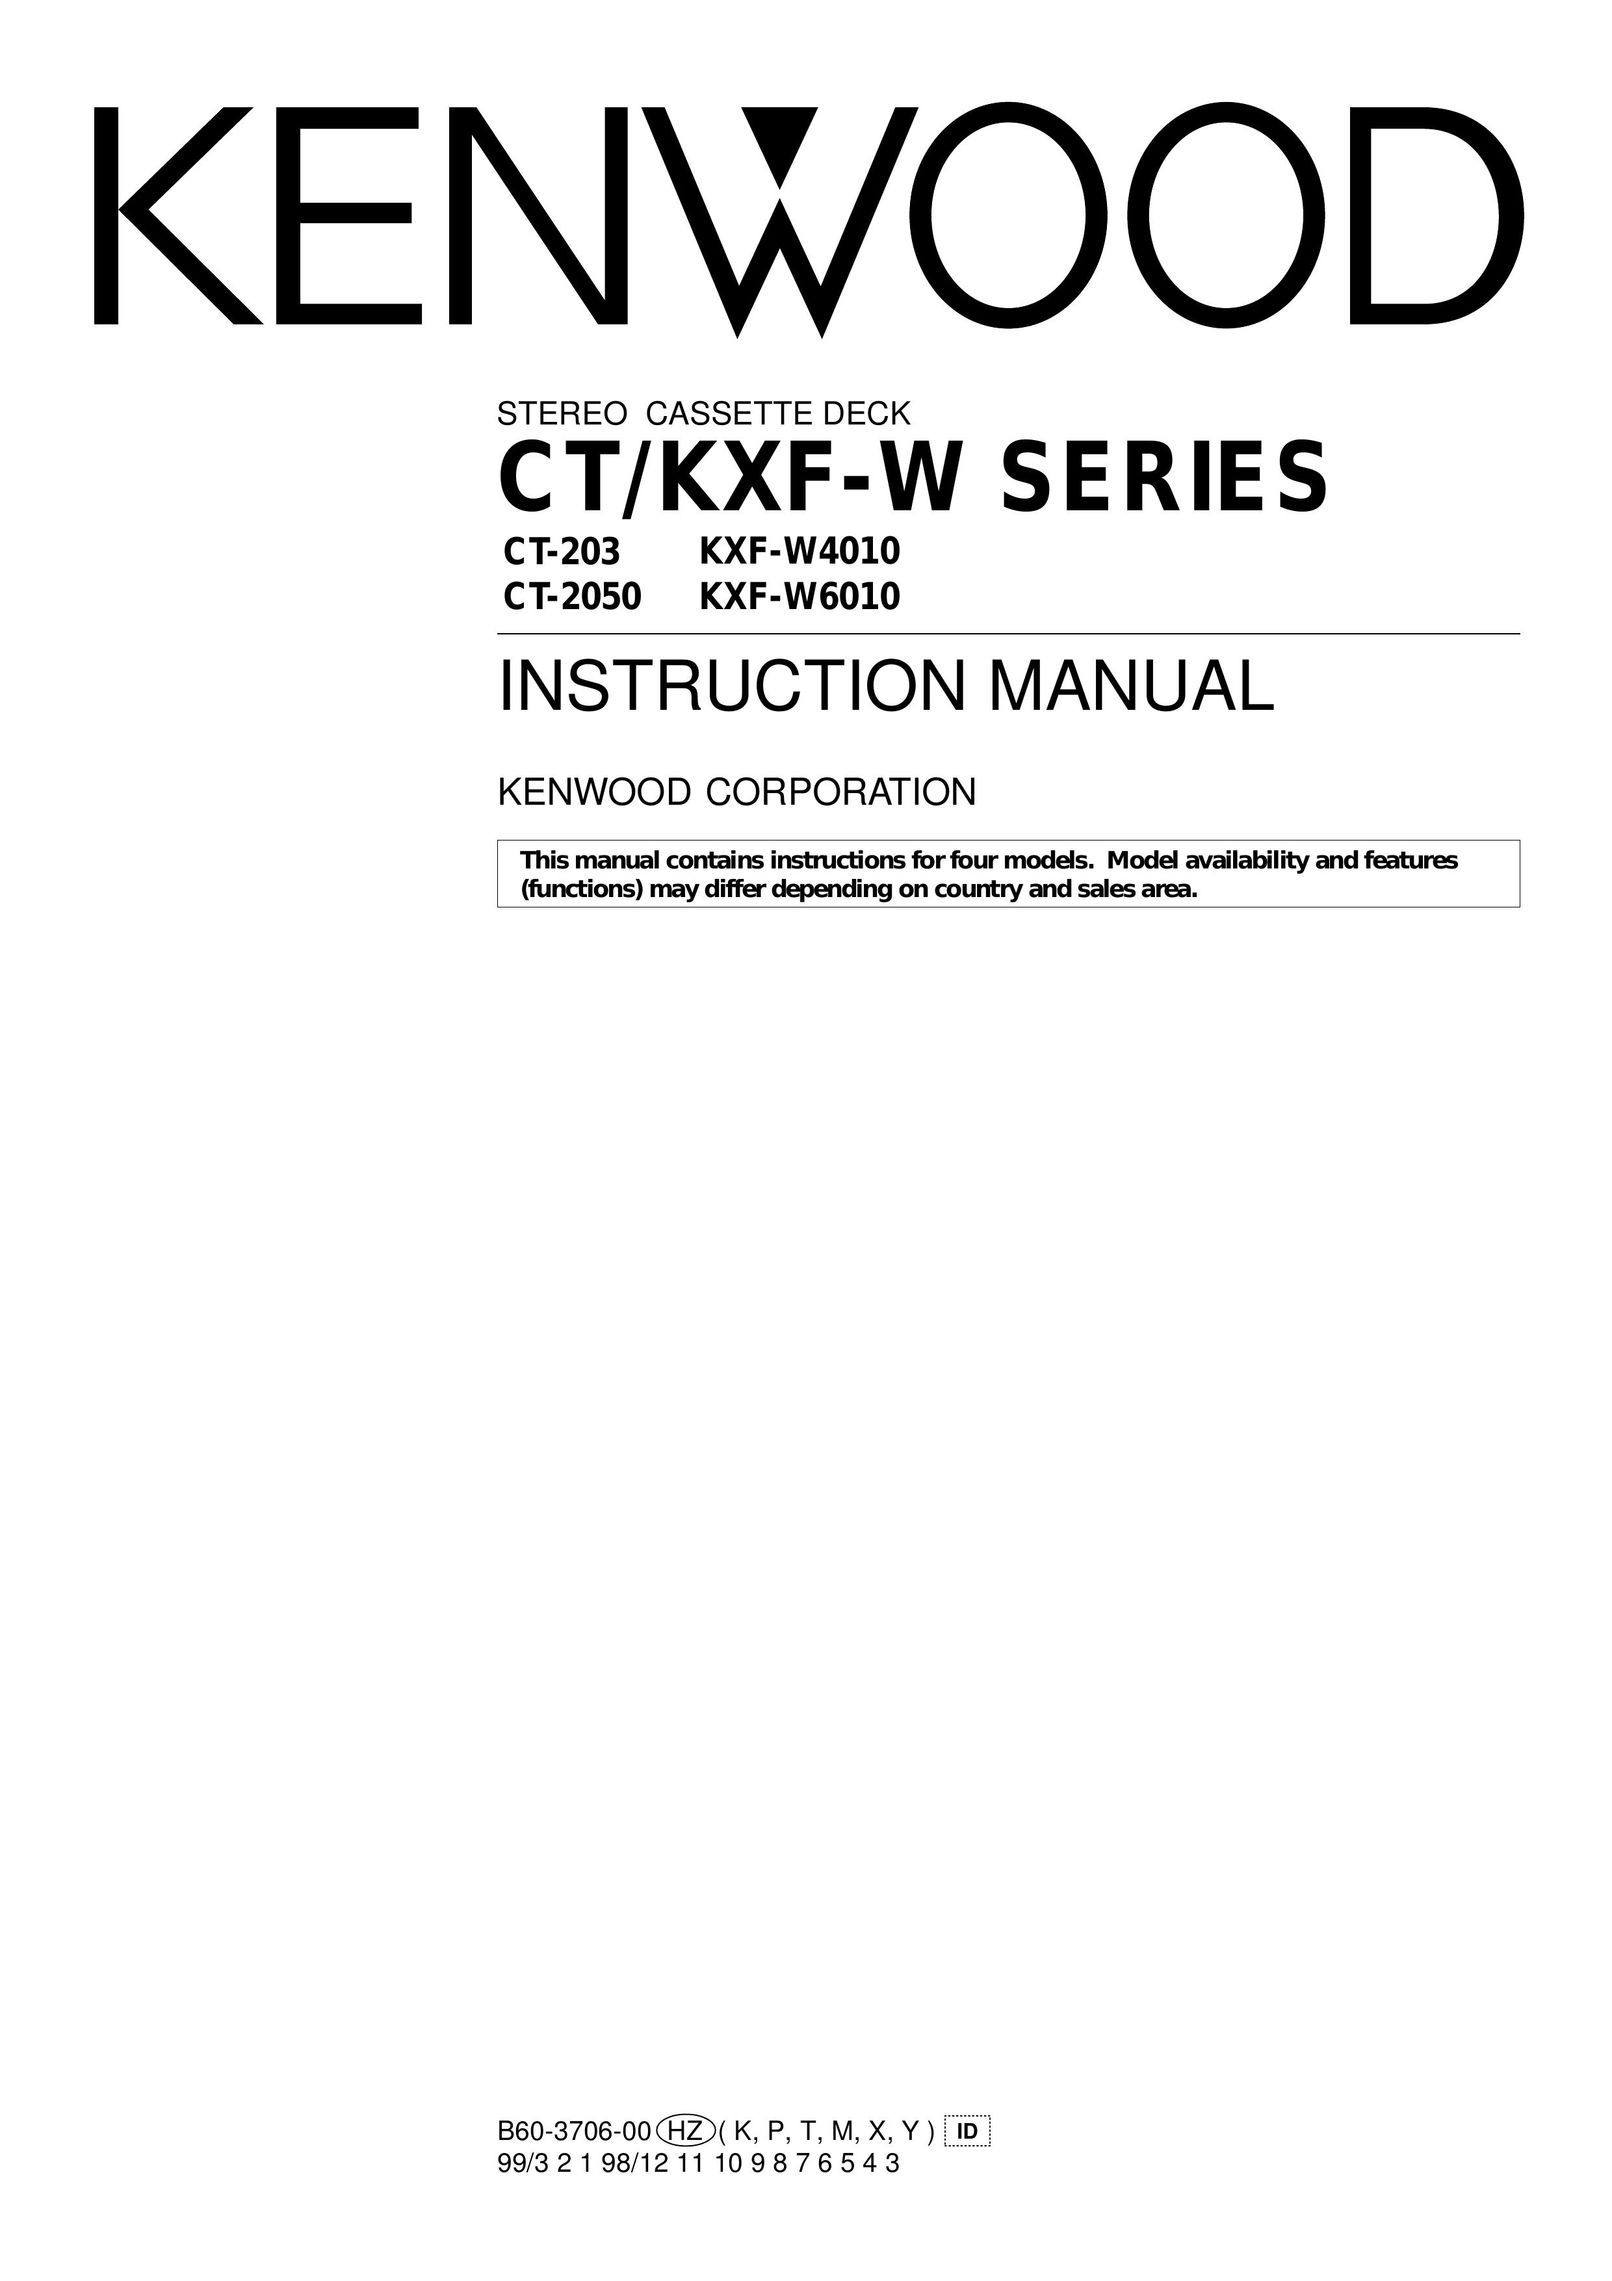 Kenwood CT-2050 Stereo System User Manual